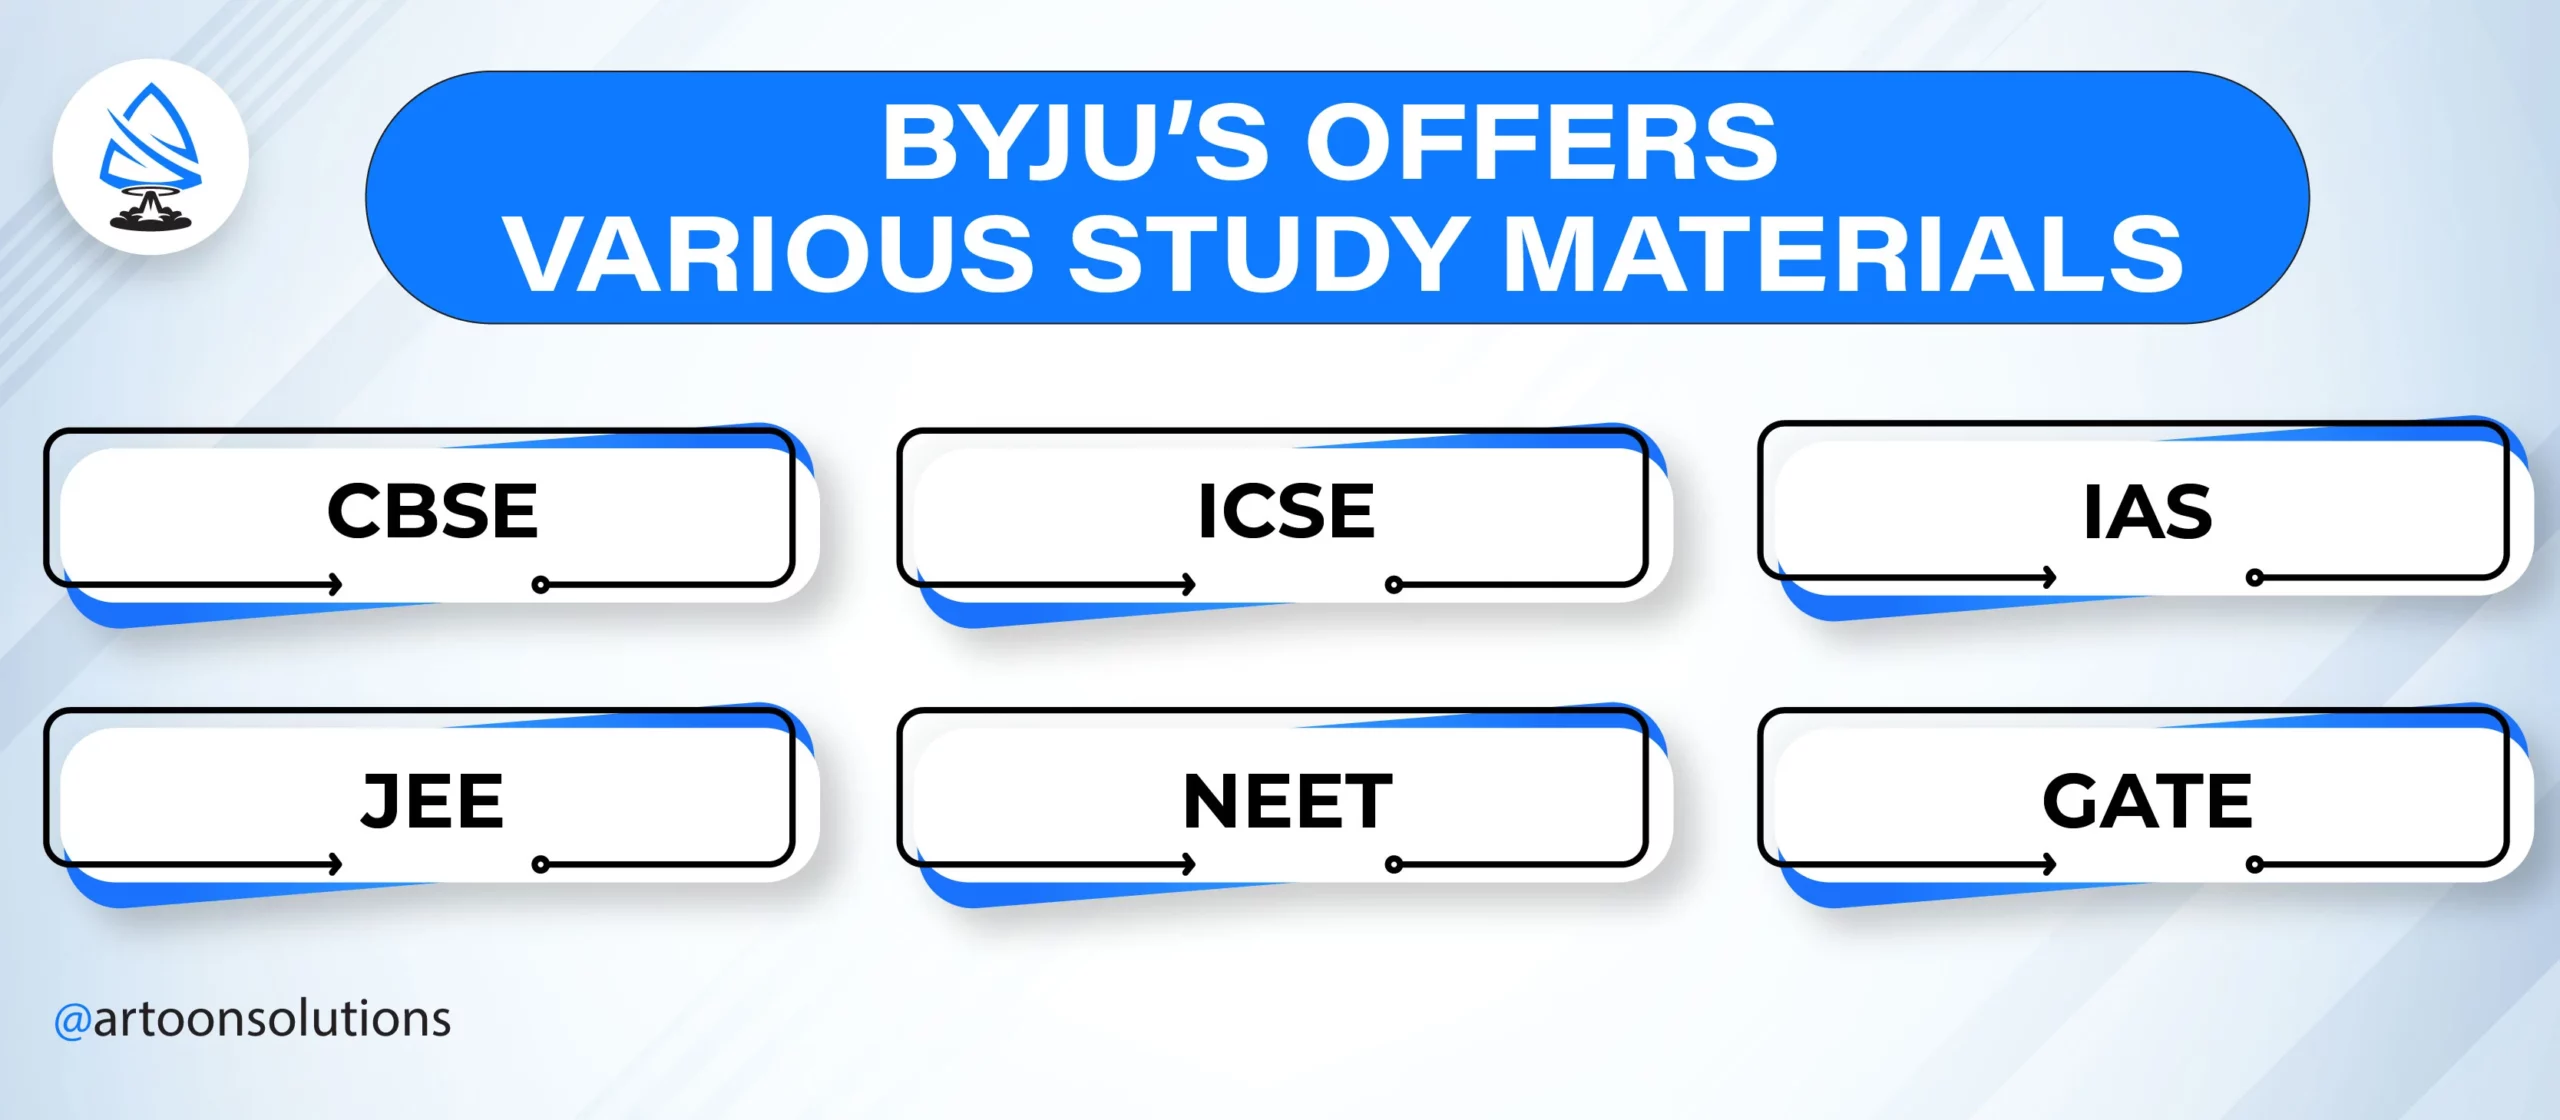 Byju offers various study materials